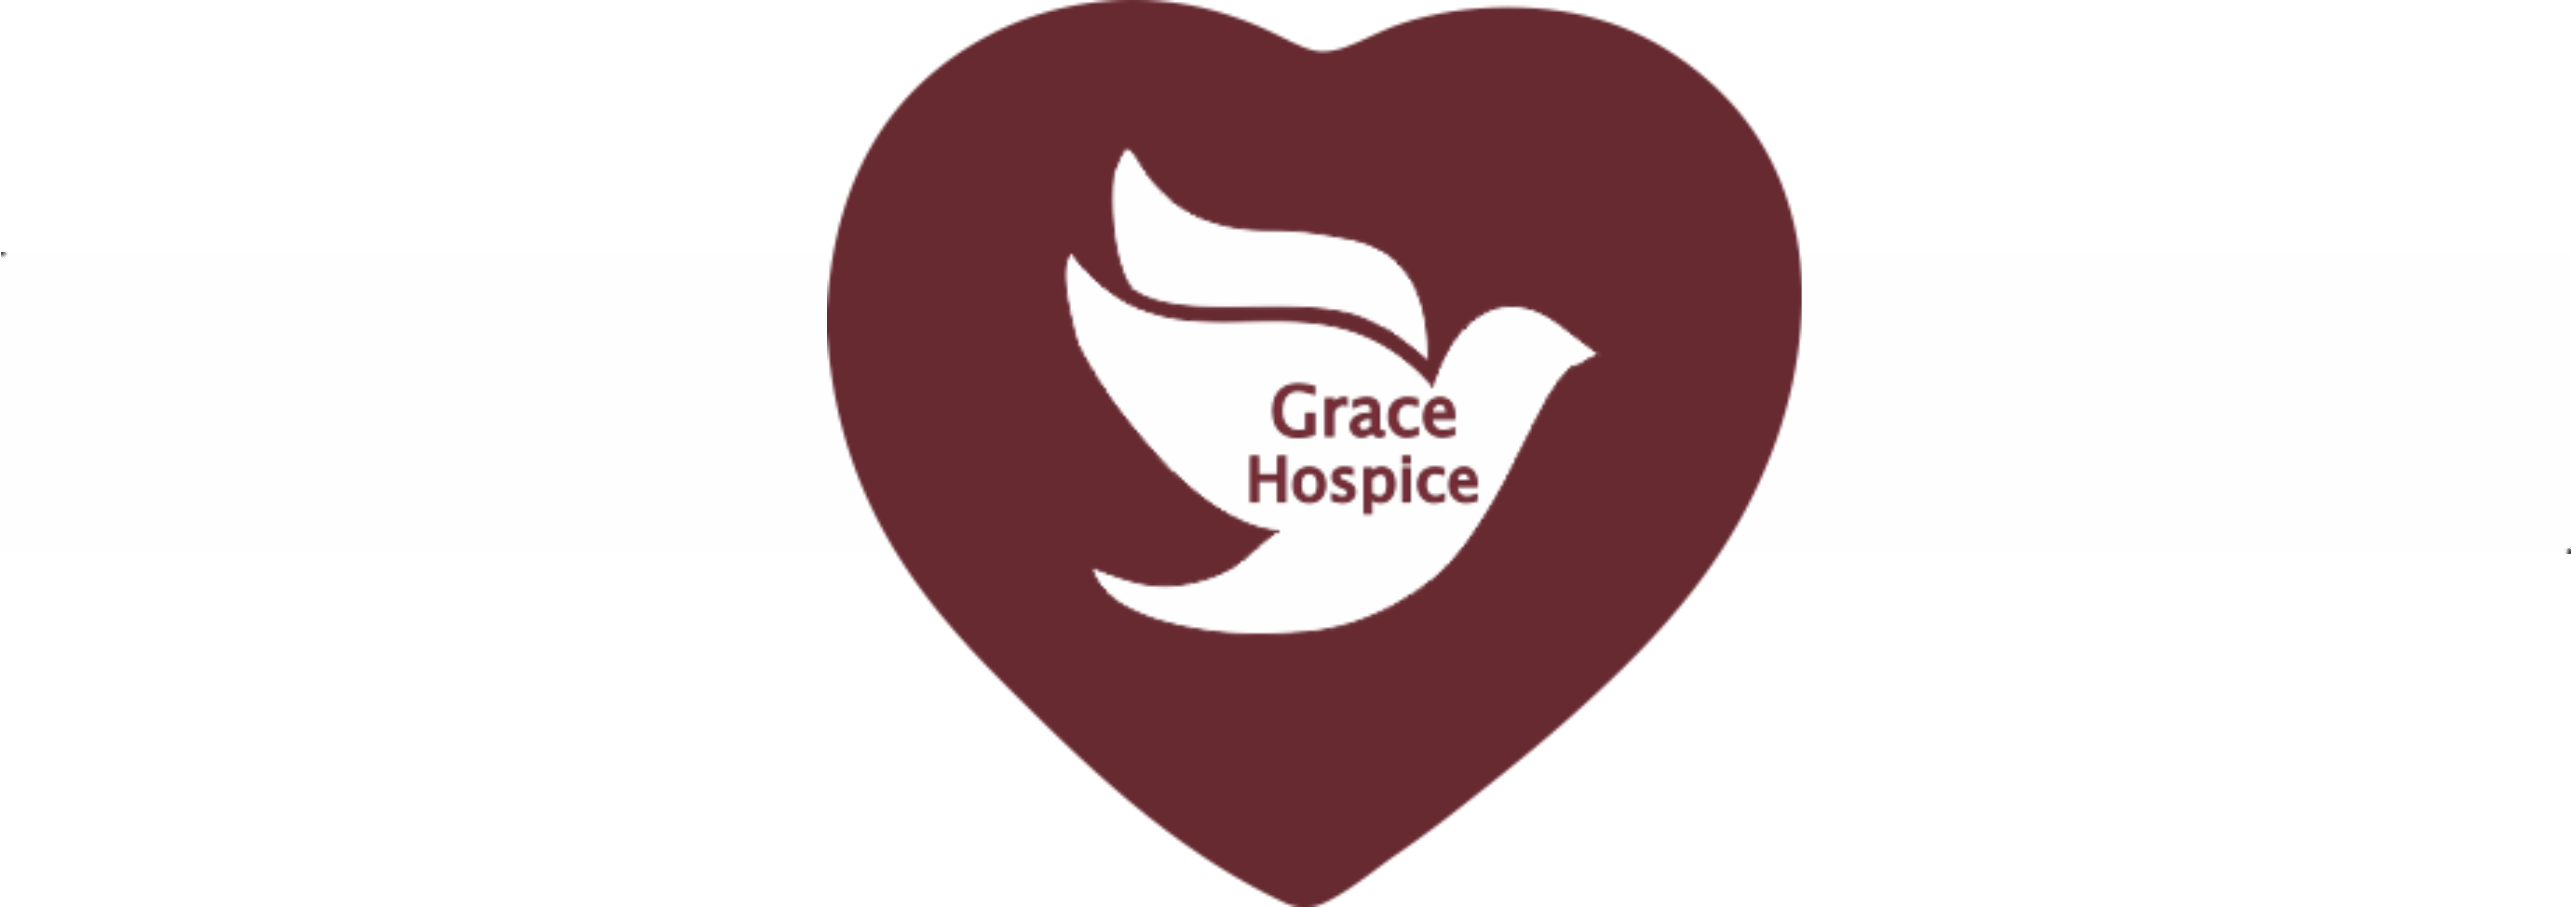 images/Grace Hospice Middle.gif